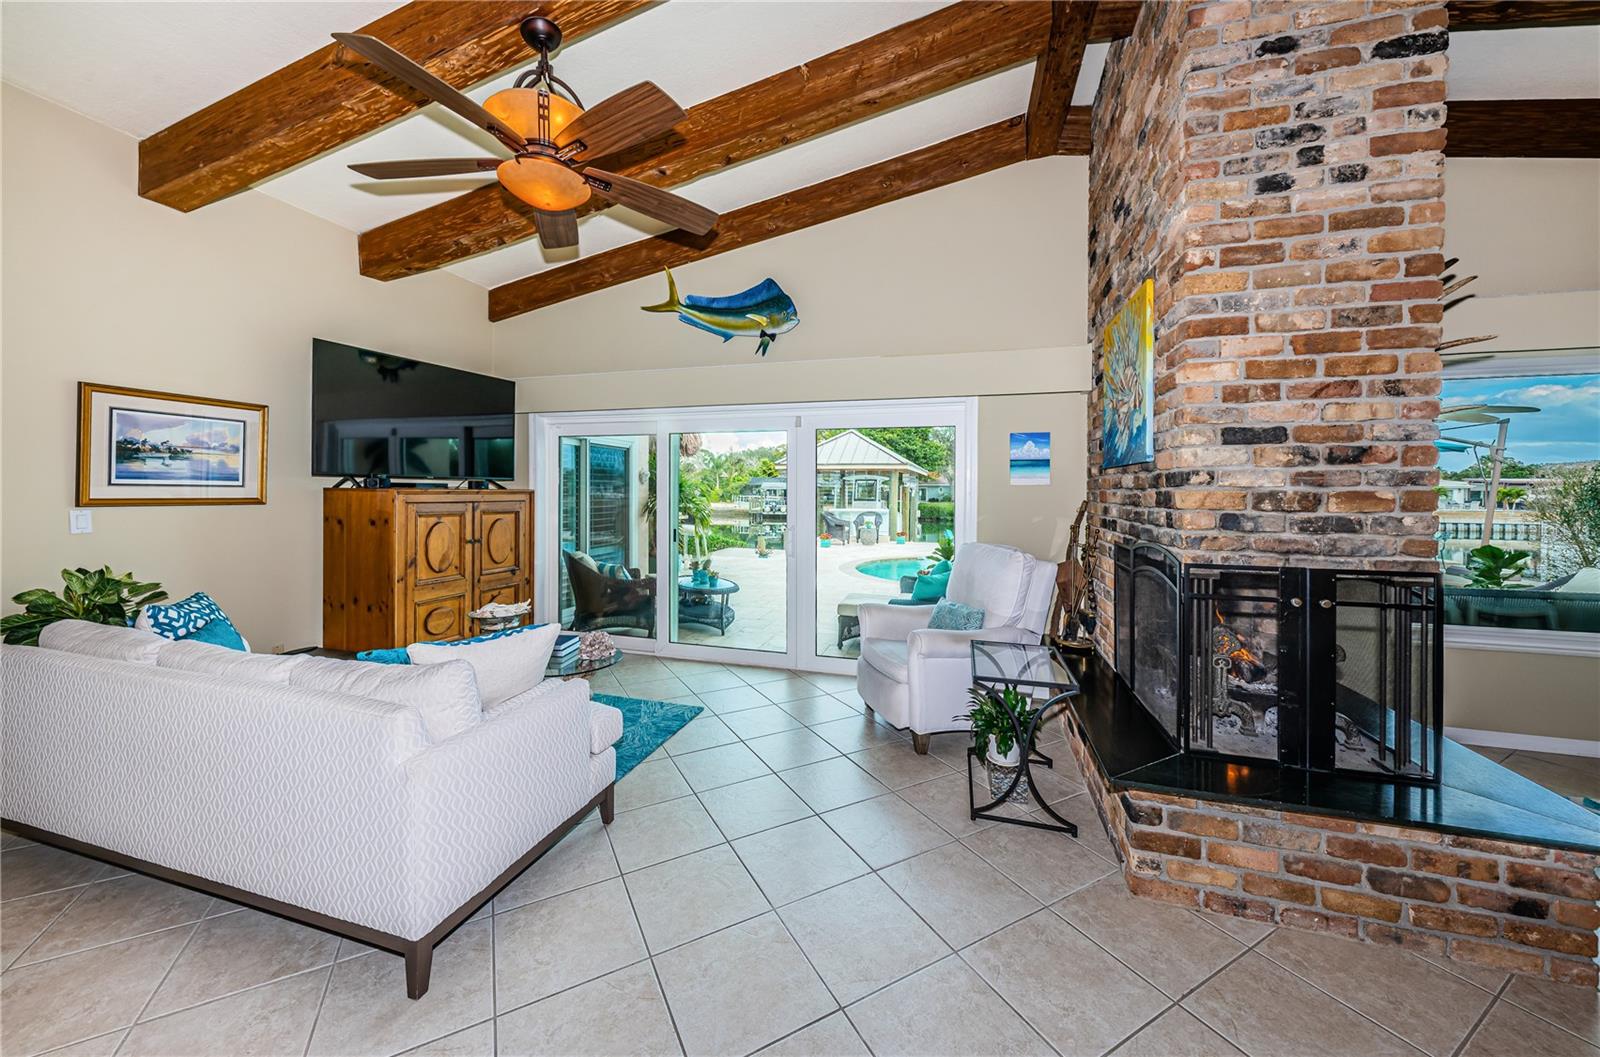 This open floor plan features vaulted ceilings.